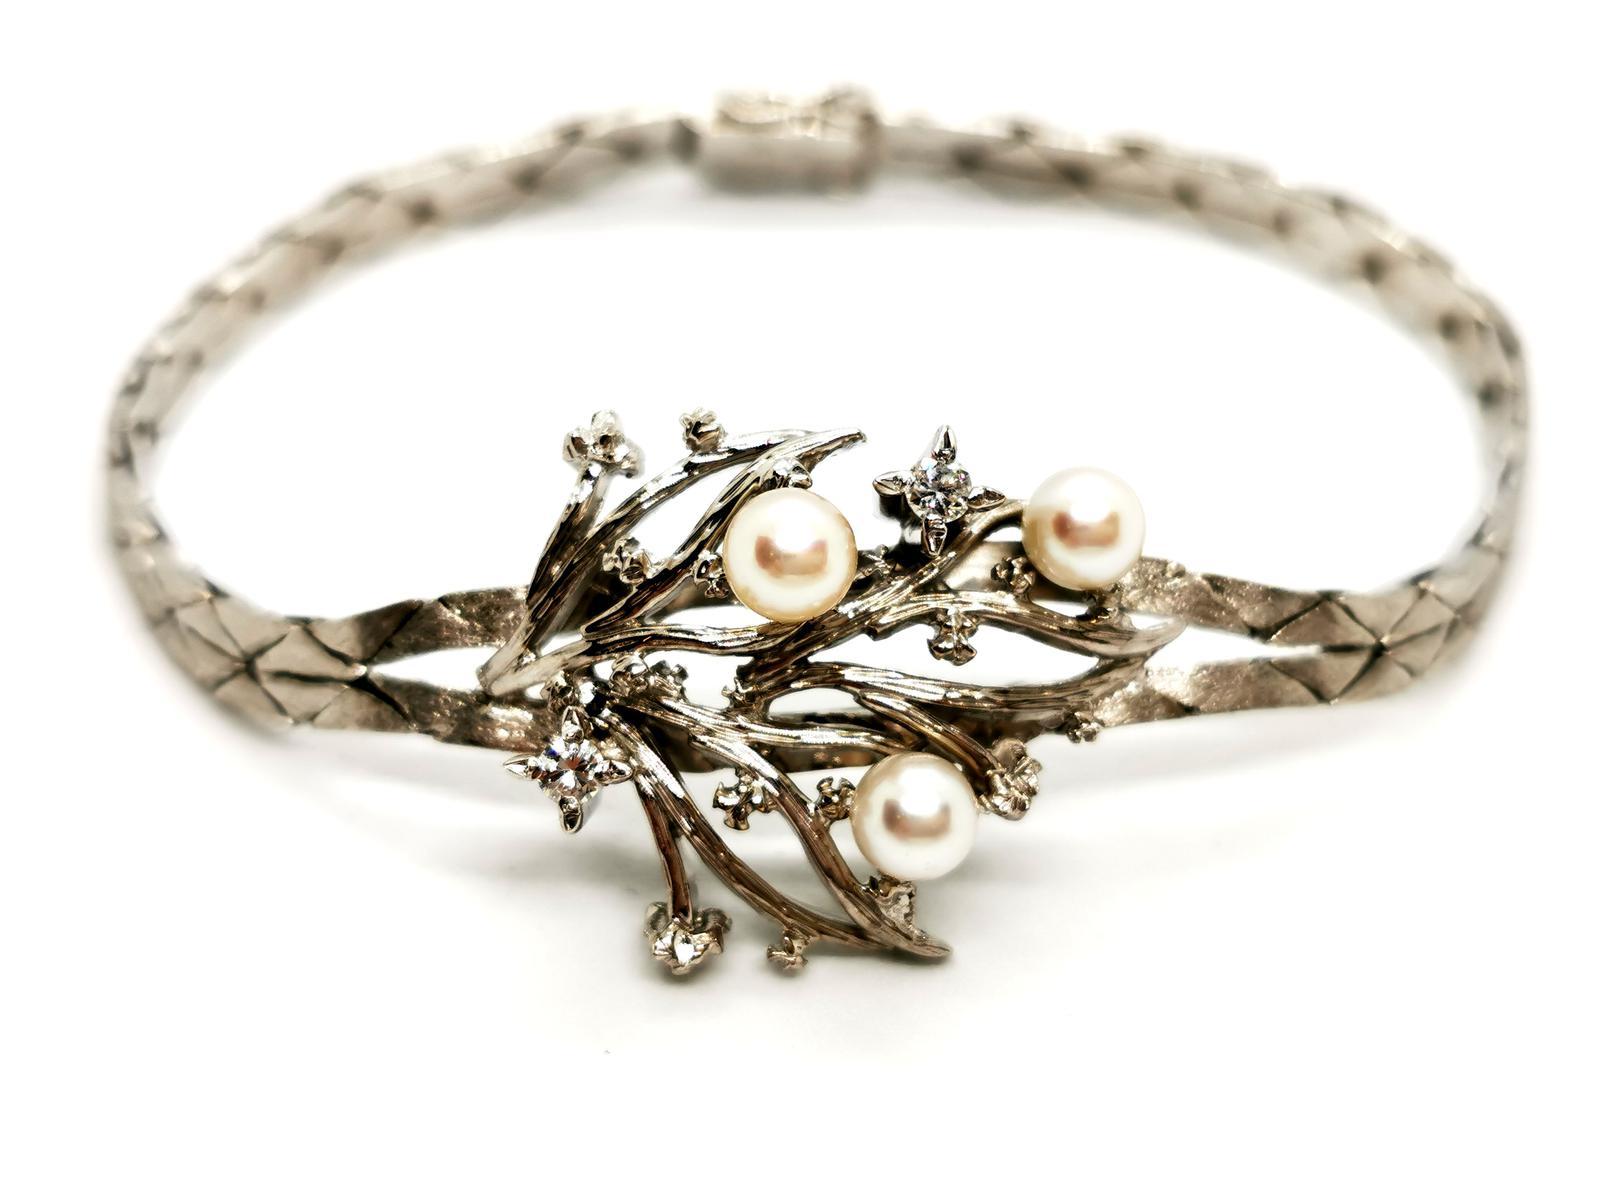 Vintage bracelet. 750 thousandths white gold (18K). center in white gold foliage pattern set with two brilliant cut diamonds of approximately 0.055 ct each. total weight diamonds: 0.11 ct approximately topped 3 cultured pearls with a diameter of